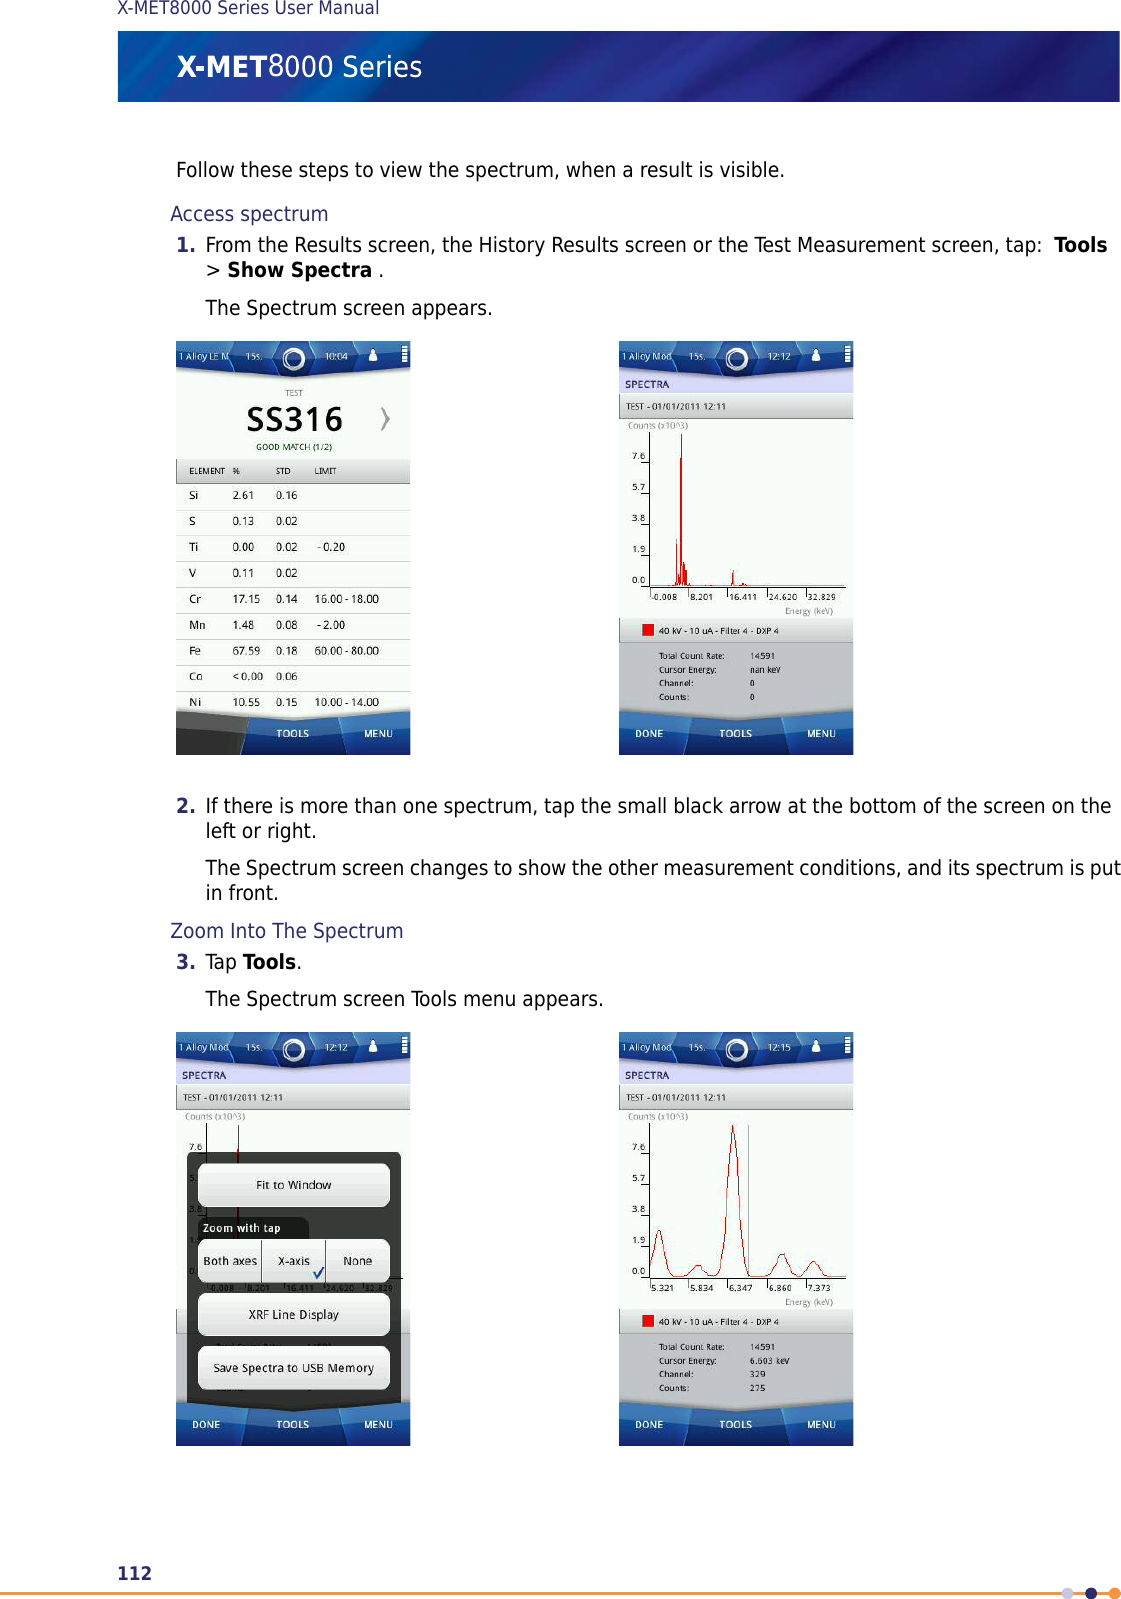 Follow these steps to view the spectrum, when a result is visible.Access spectrum1. From the Results screen, the History Results screen or the Test Measurement screen, tap: Tools&gt;Show Spectra .The Spectrum screen appears.2. If there is more than one spectrum, tap the small black arrow at the bottom of the screen on theleft or right.The Spectrum screen changes to show the other measurement conditions, and its spectrum is putin front.Zoom Into The Spectrum3. Tap Tools.The Spectrum screen Tools menu appears.112X-MET8000 Series User Manual8